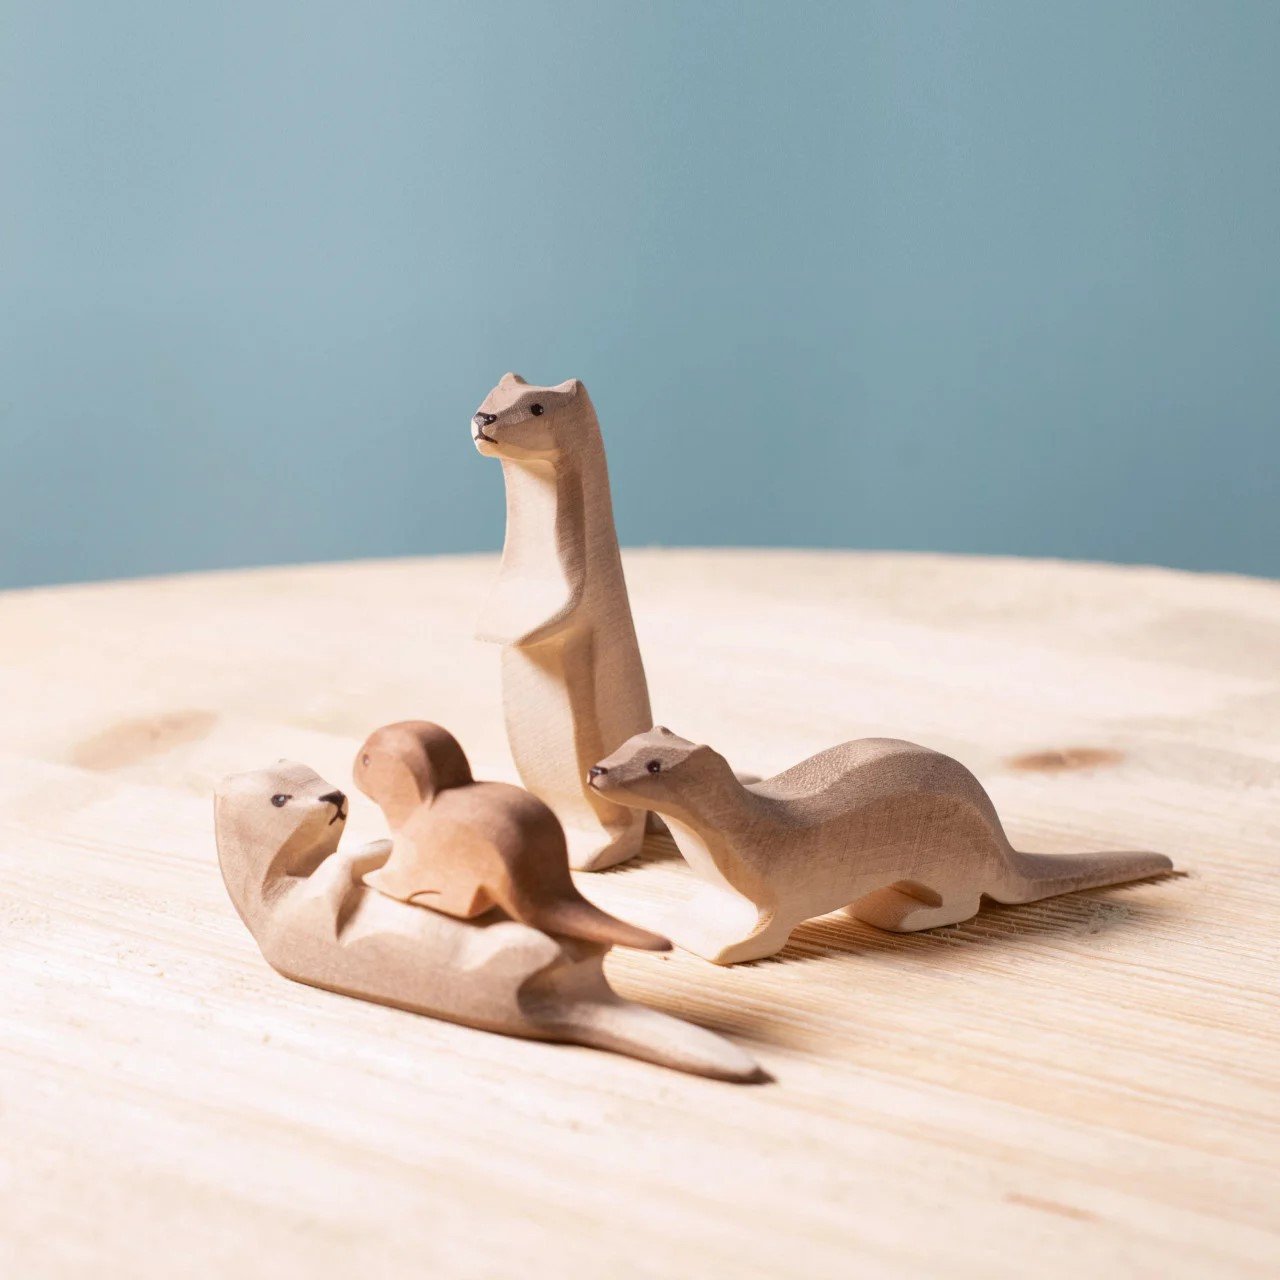 Handcrafted Wooden Toys for Inspired Play